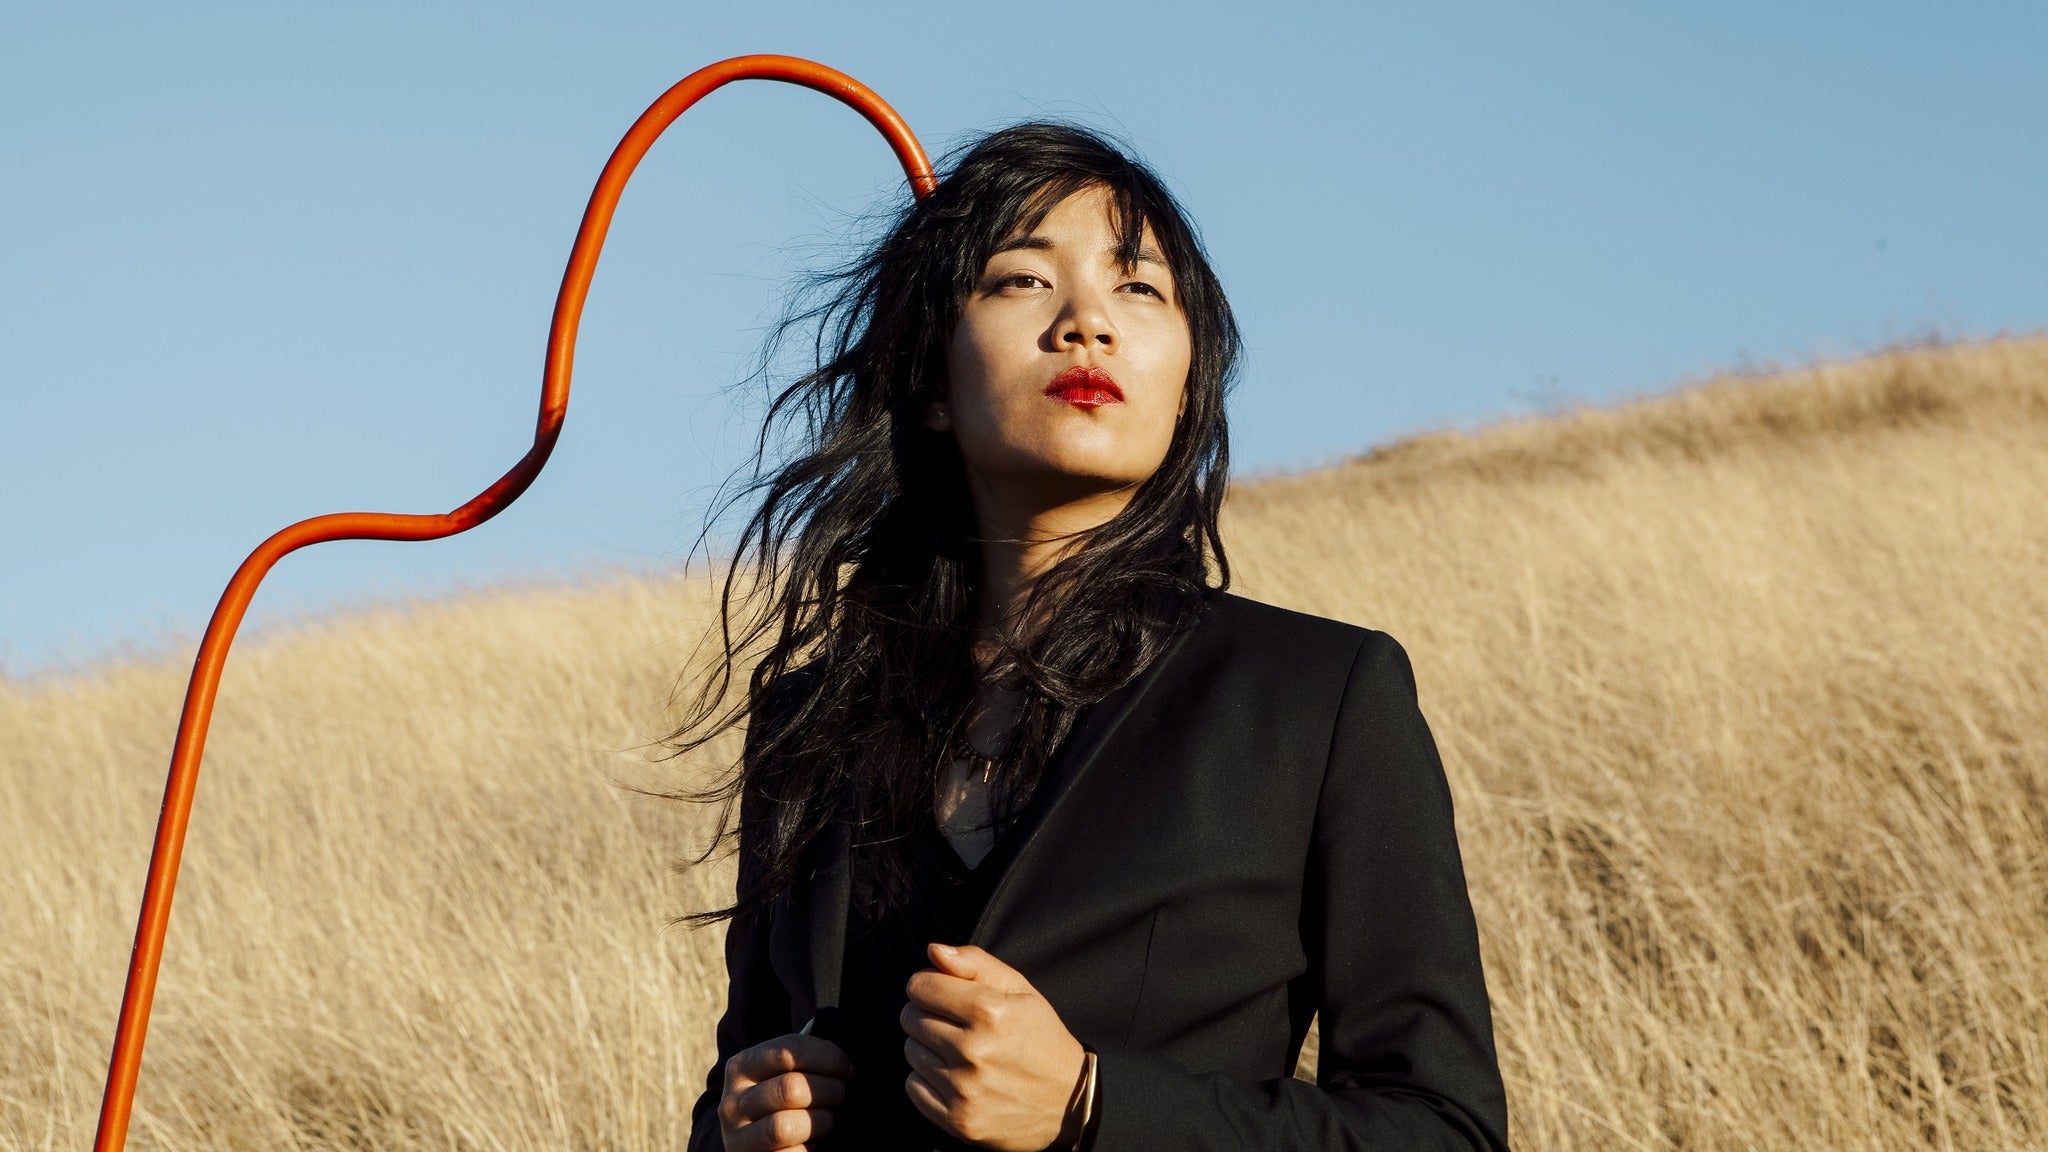 Thao & The Get Down Stay Down in Seattle promo photo for Artist presale offer code